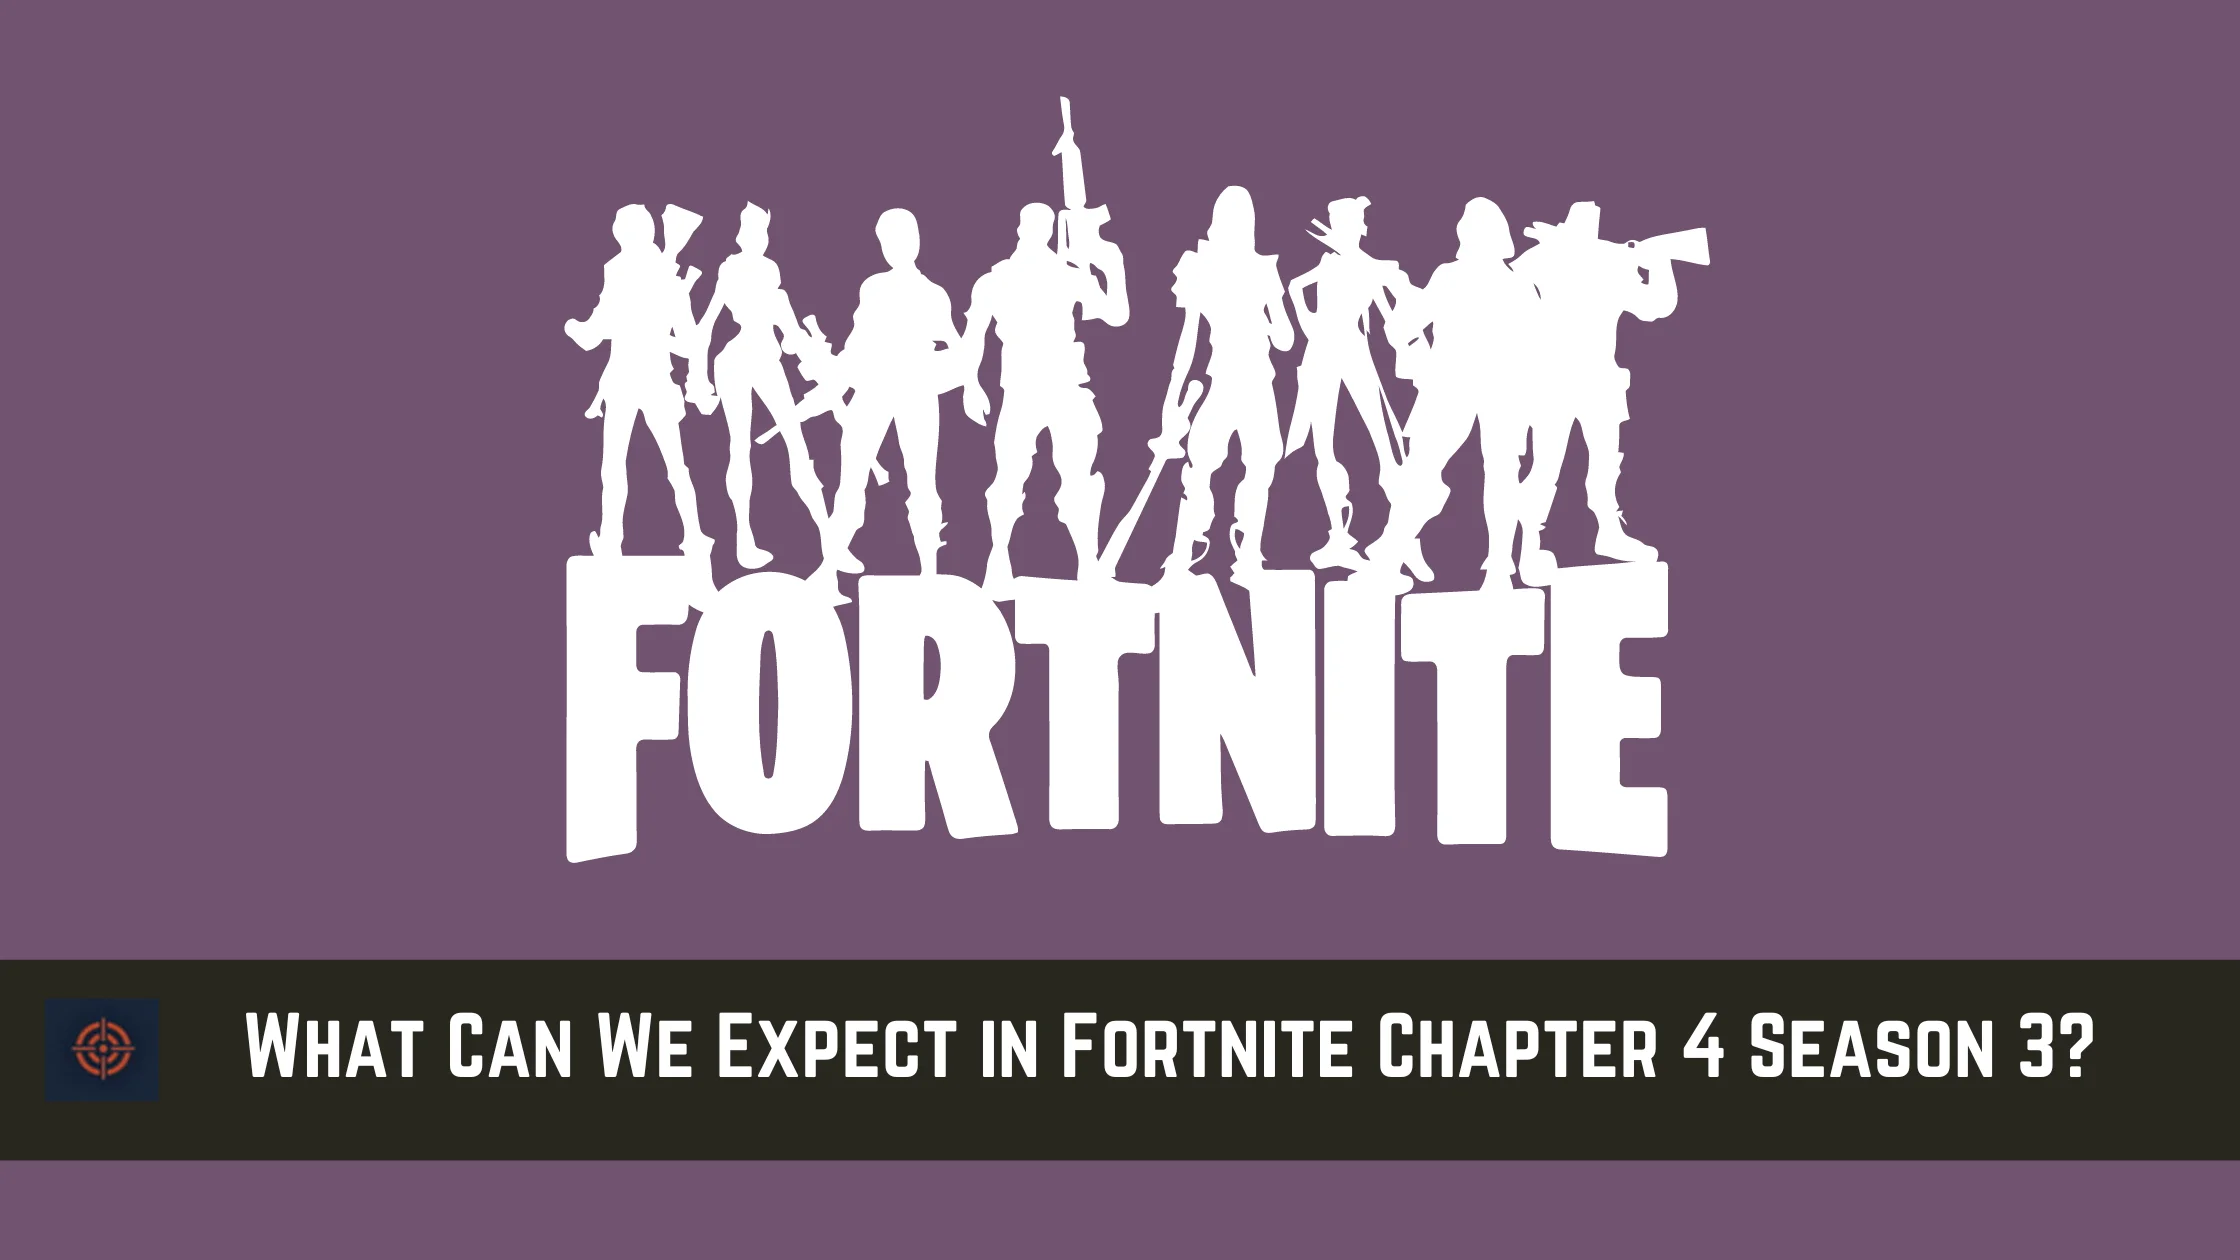 What Can We Expect in Fortnite Chapter 4 Season 3